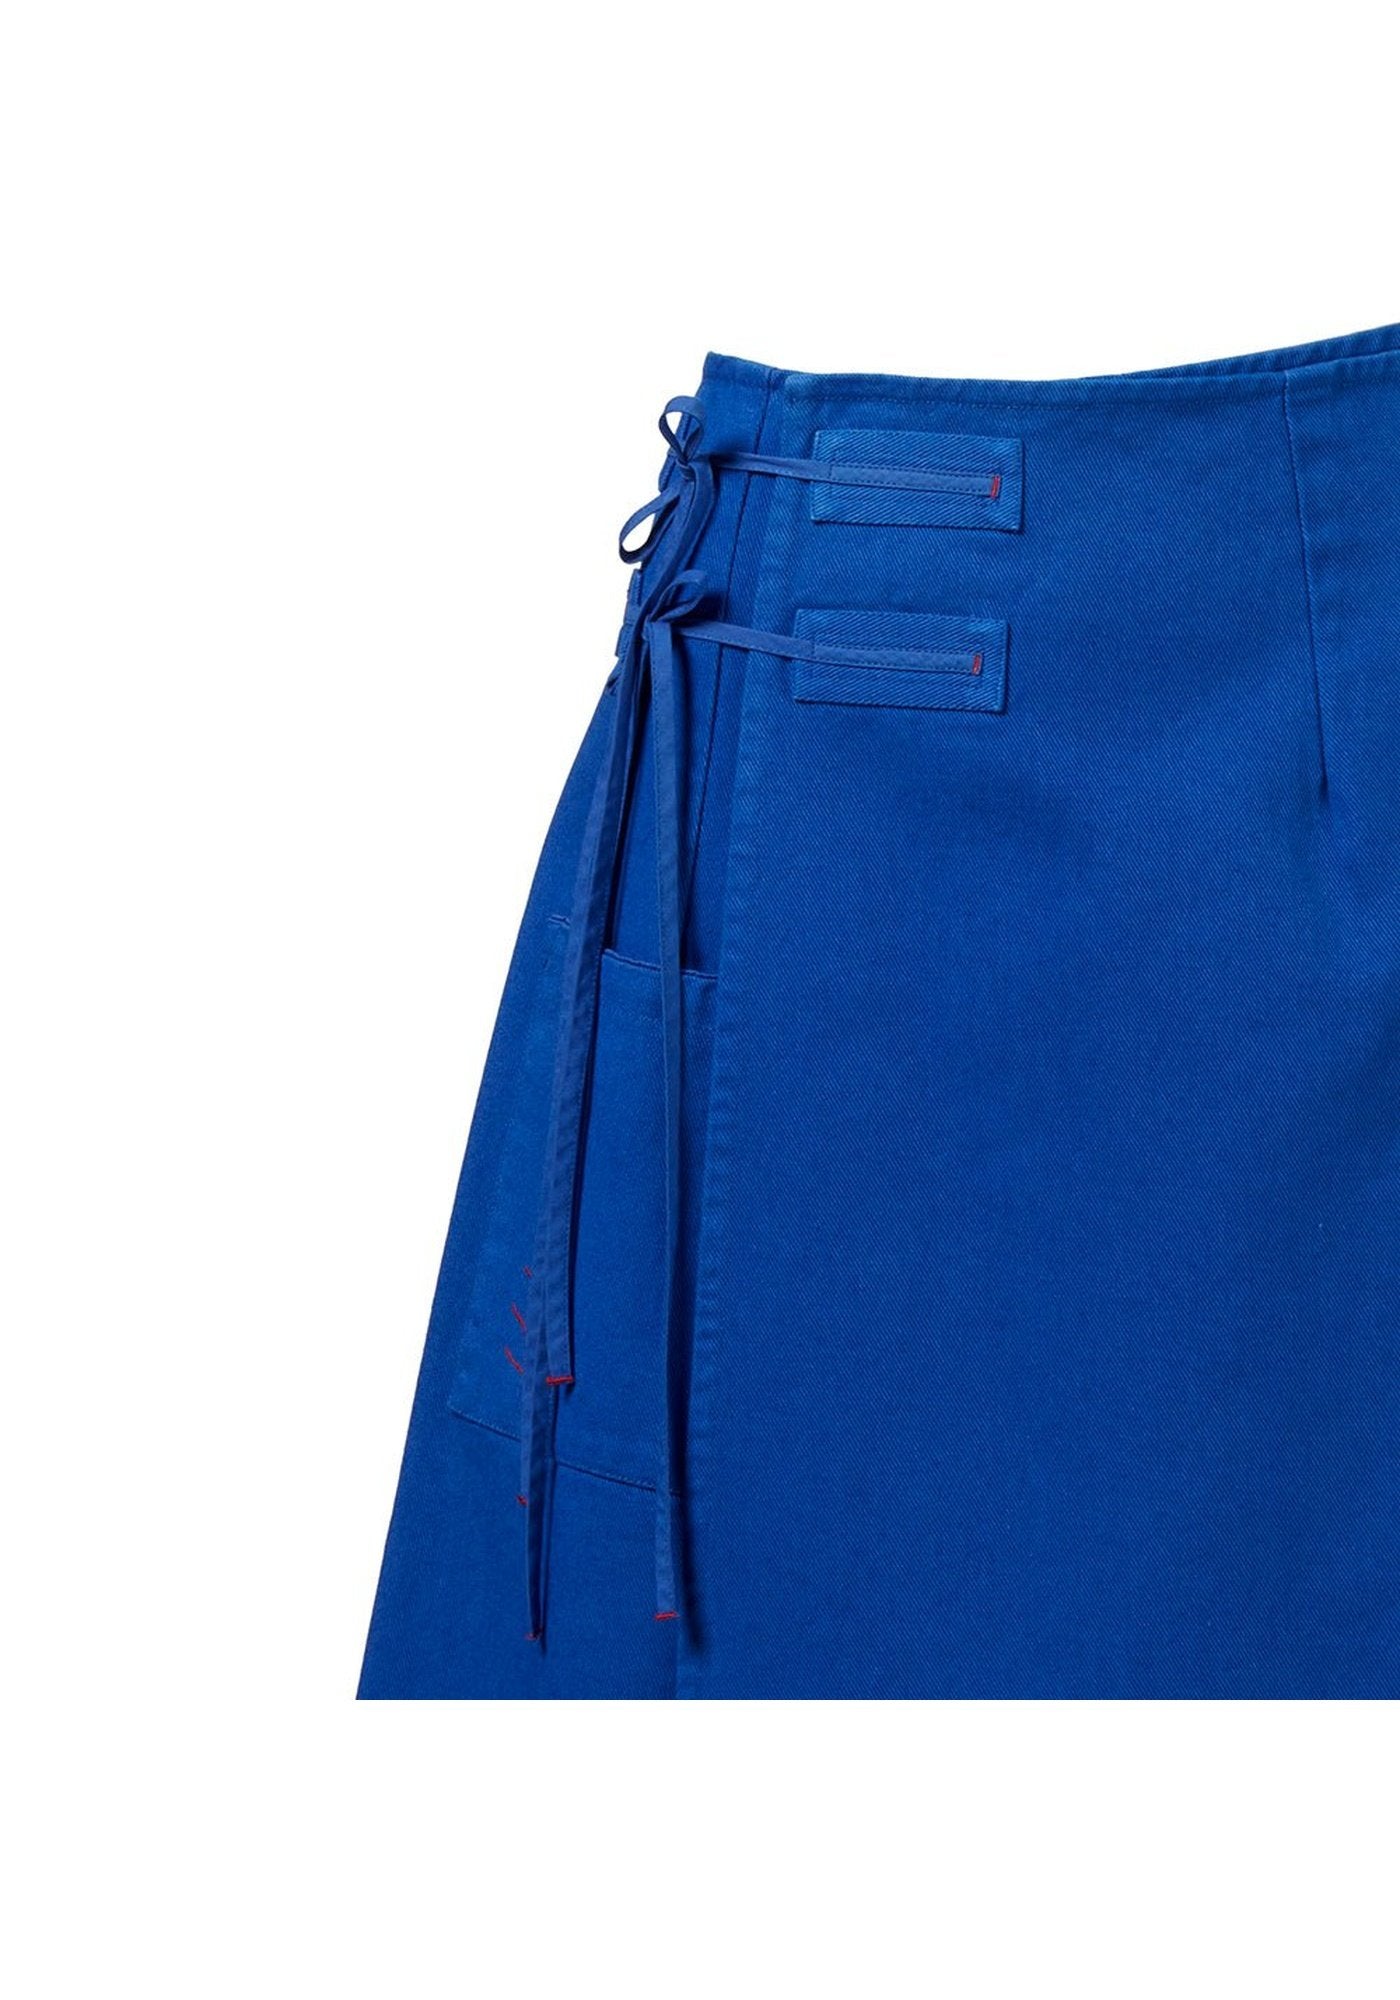 Skirt Overlap Twill - Traces of Me